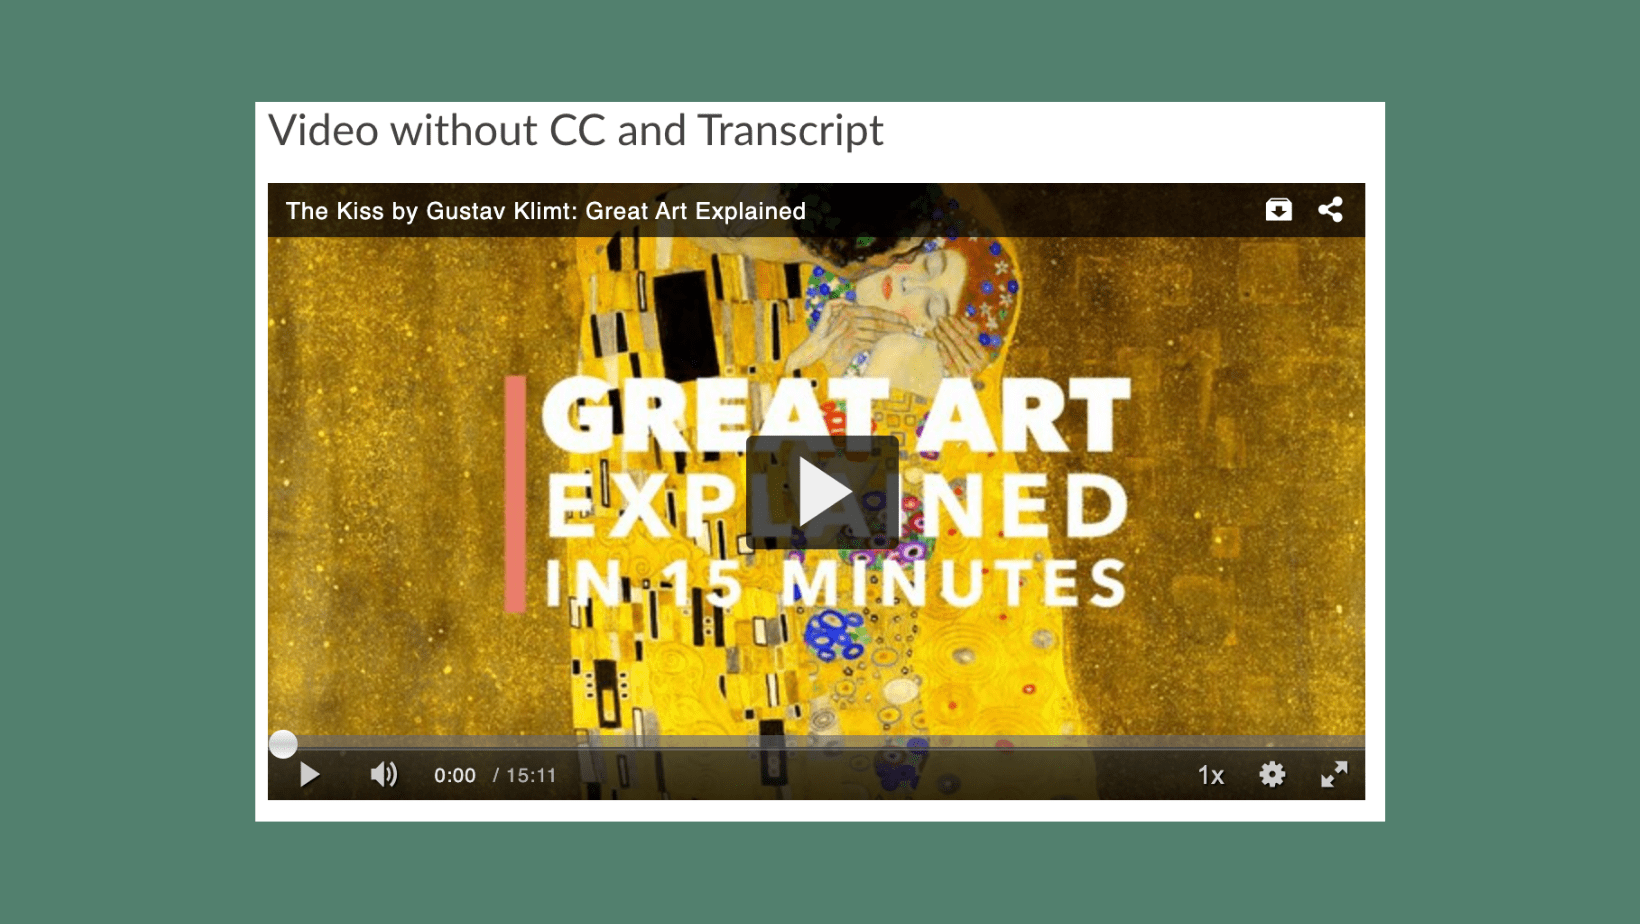 Screenshot displaying text that reads ‘Video without CC and Transcript.’ Below the text is a video titled ‘The Kiss by Gustav Klimt: Great Art Explained.’ The video does not display an option to turn on closed captioning.